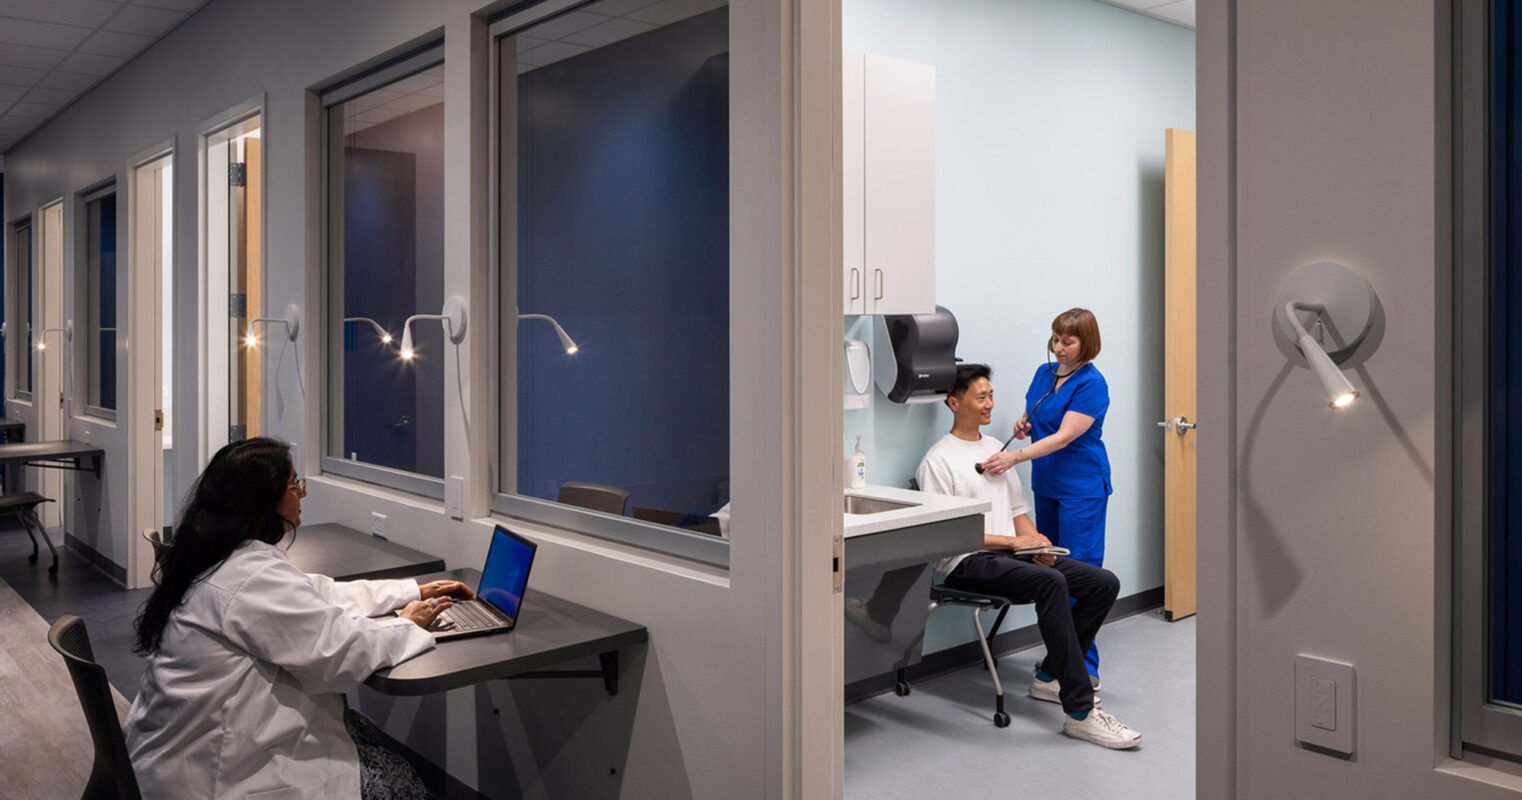 Modern healthcare office with ergonomic design featuring a row of cubicles with glass partitions, sleek white desks, and blue privacy curtains. Healthcare professionals engage with patients, reflecting a dynamic and client-centered environment.